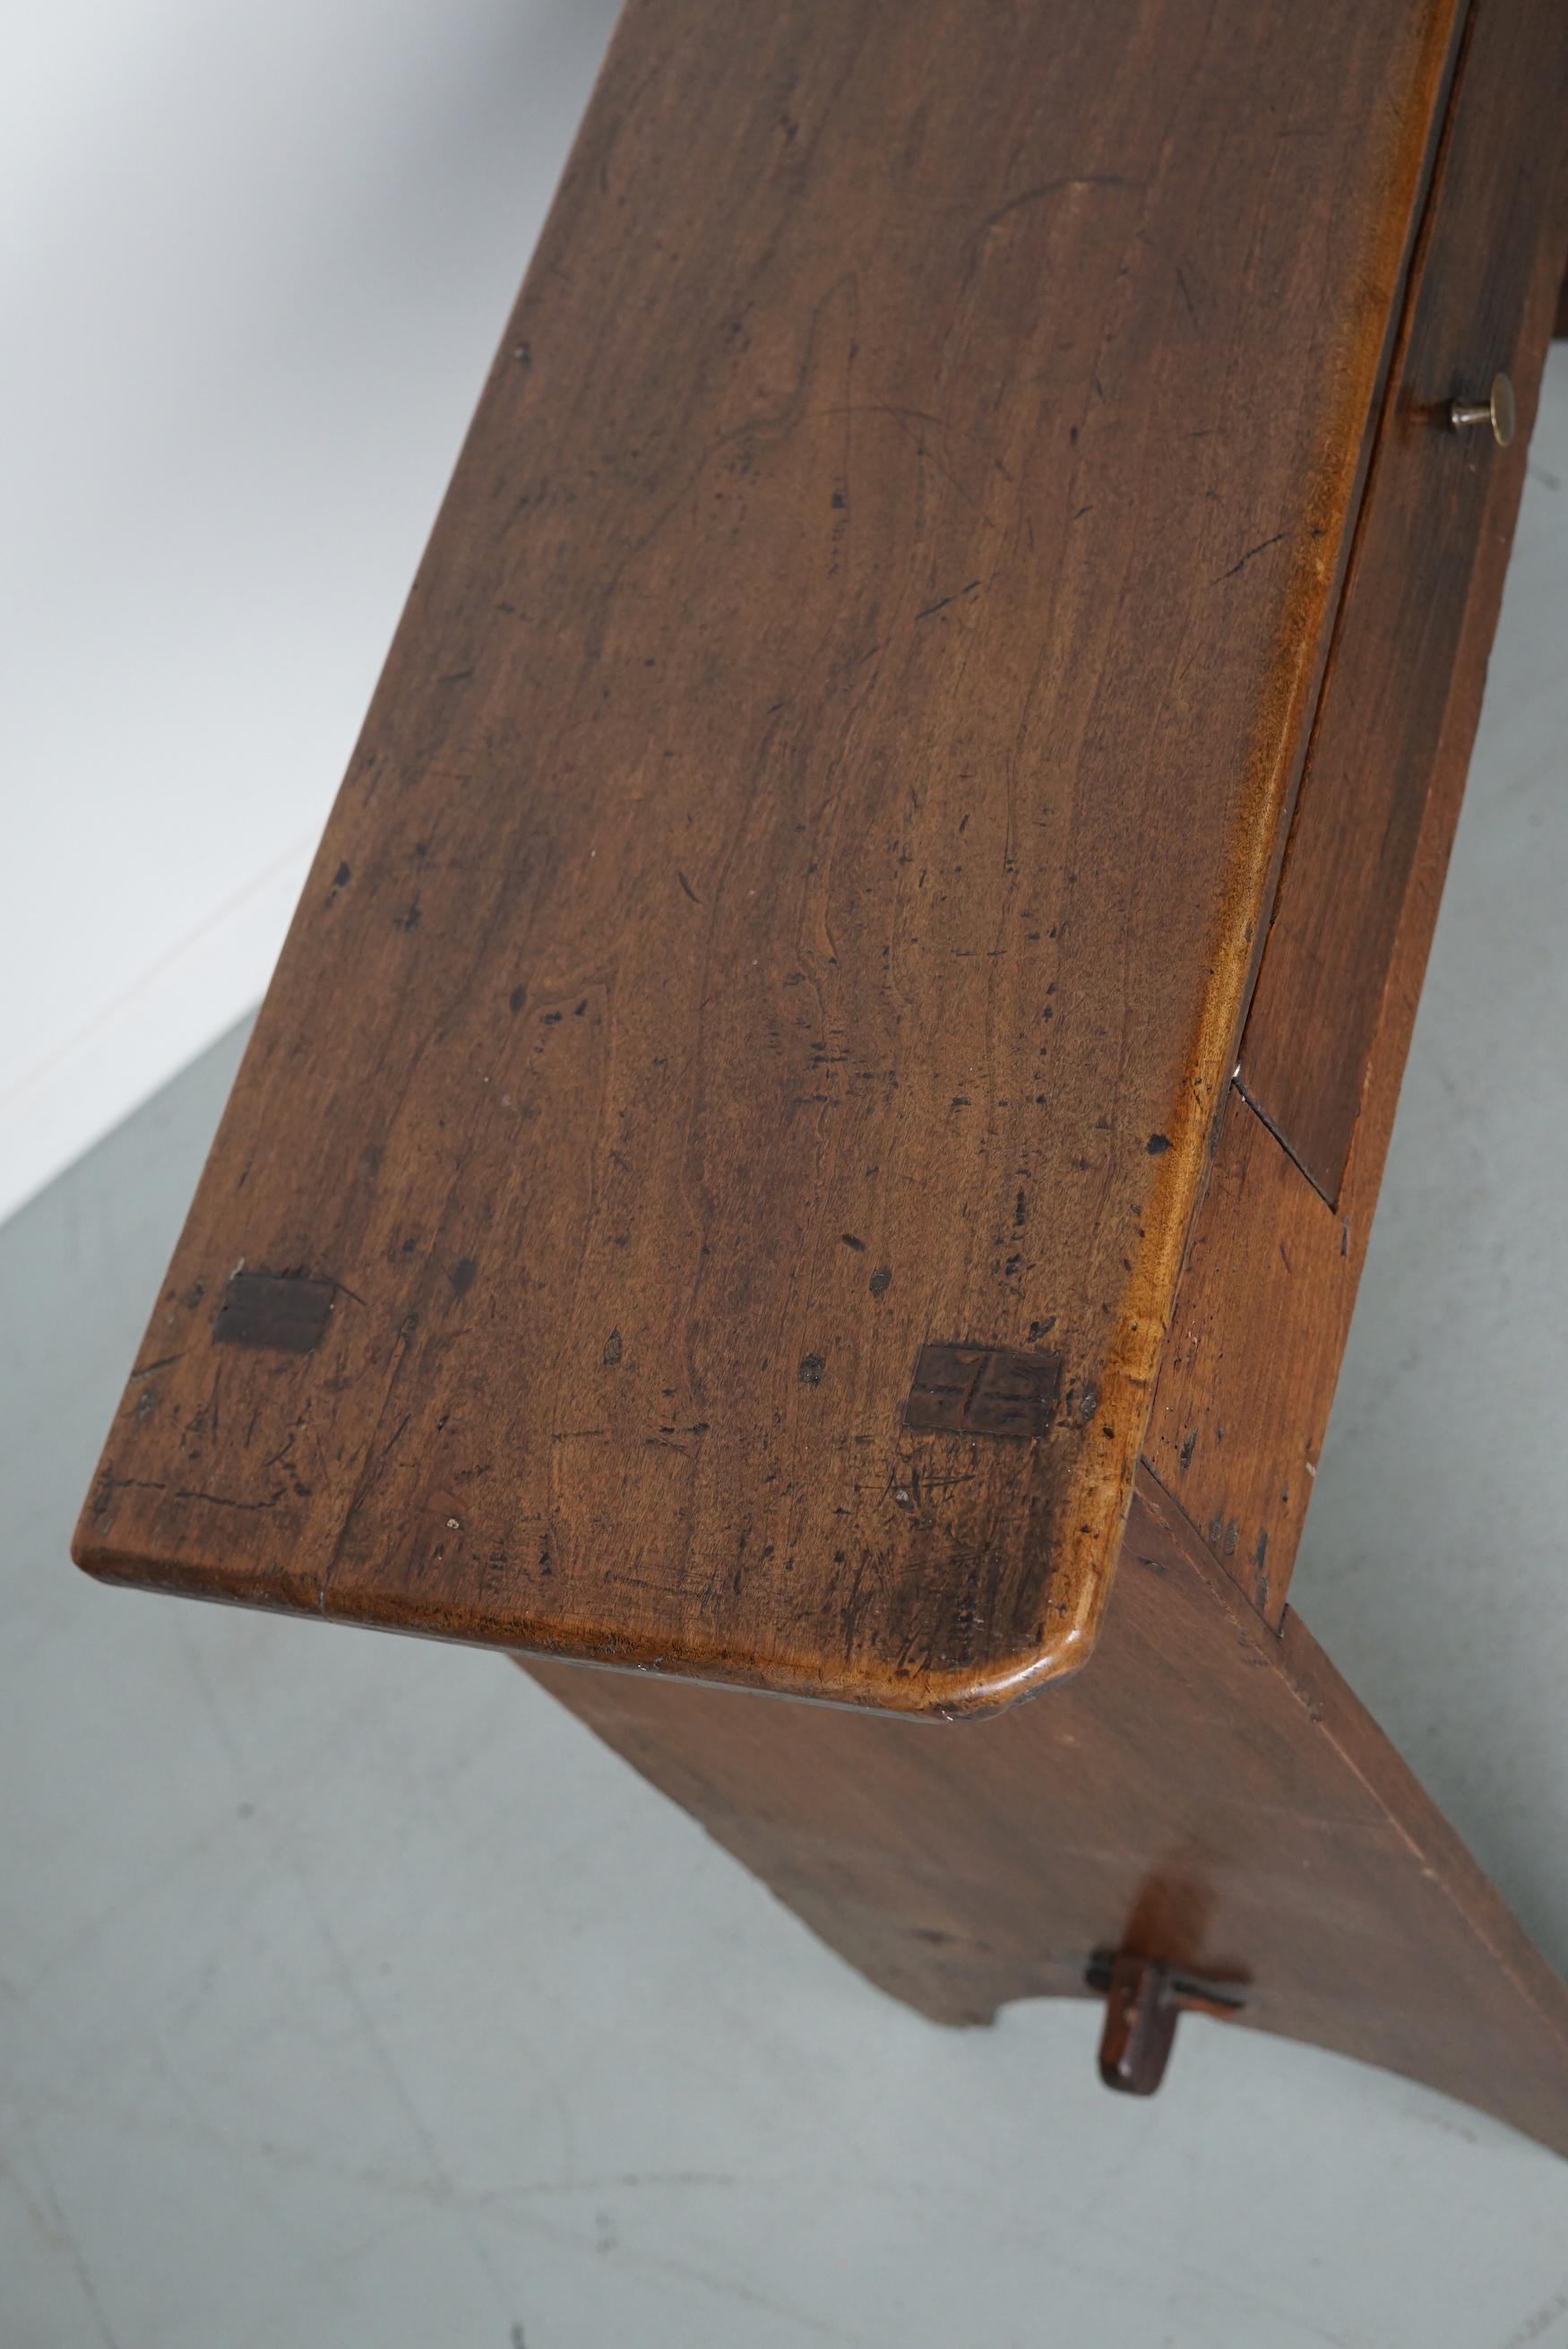 This elegant table was made in France from fruitwood with beautiful grain patterns. It has a warm color with deep gloss and the table shows many marks of use and has great patina.